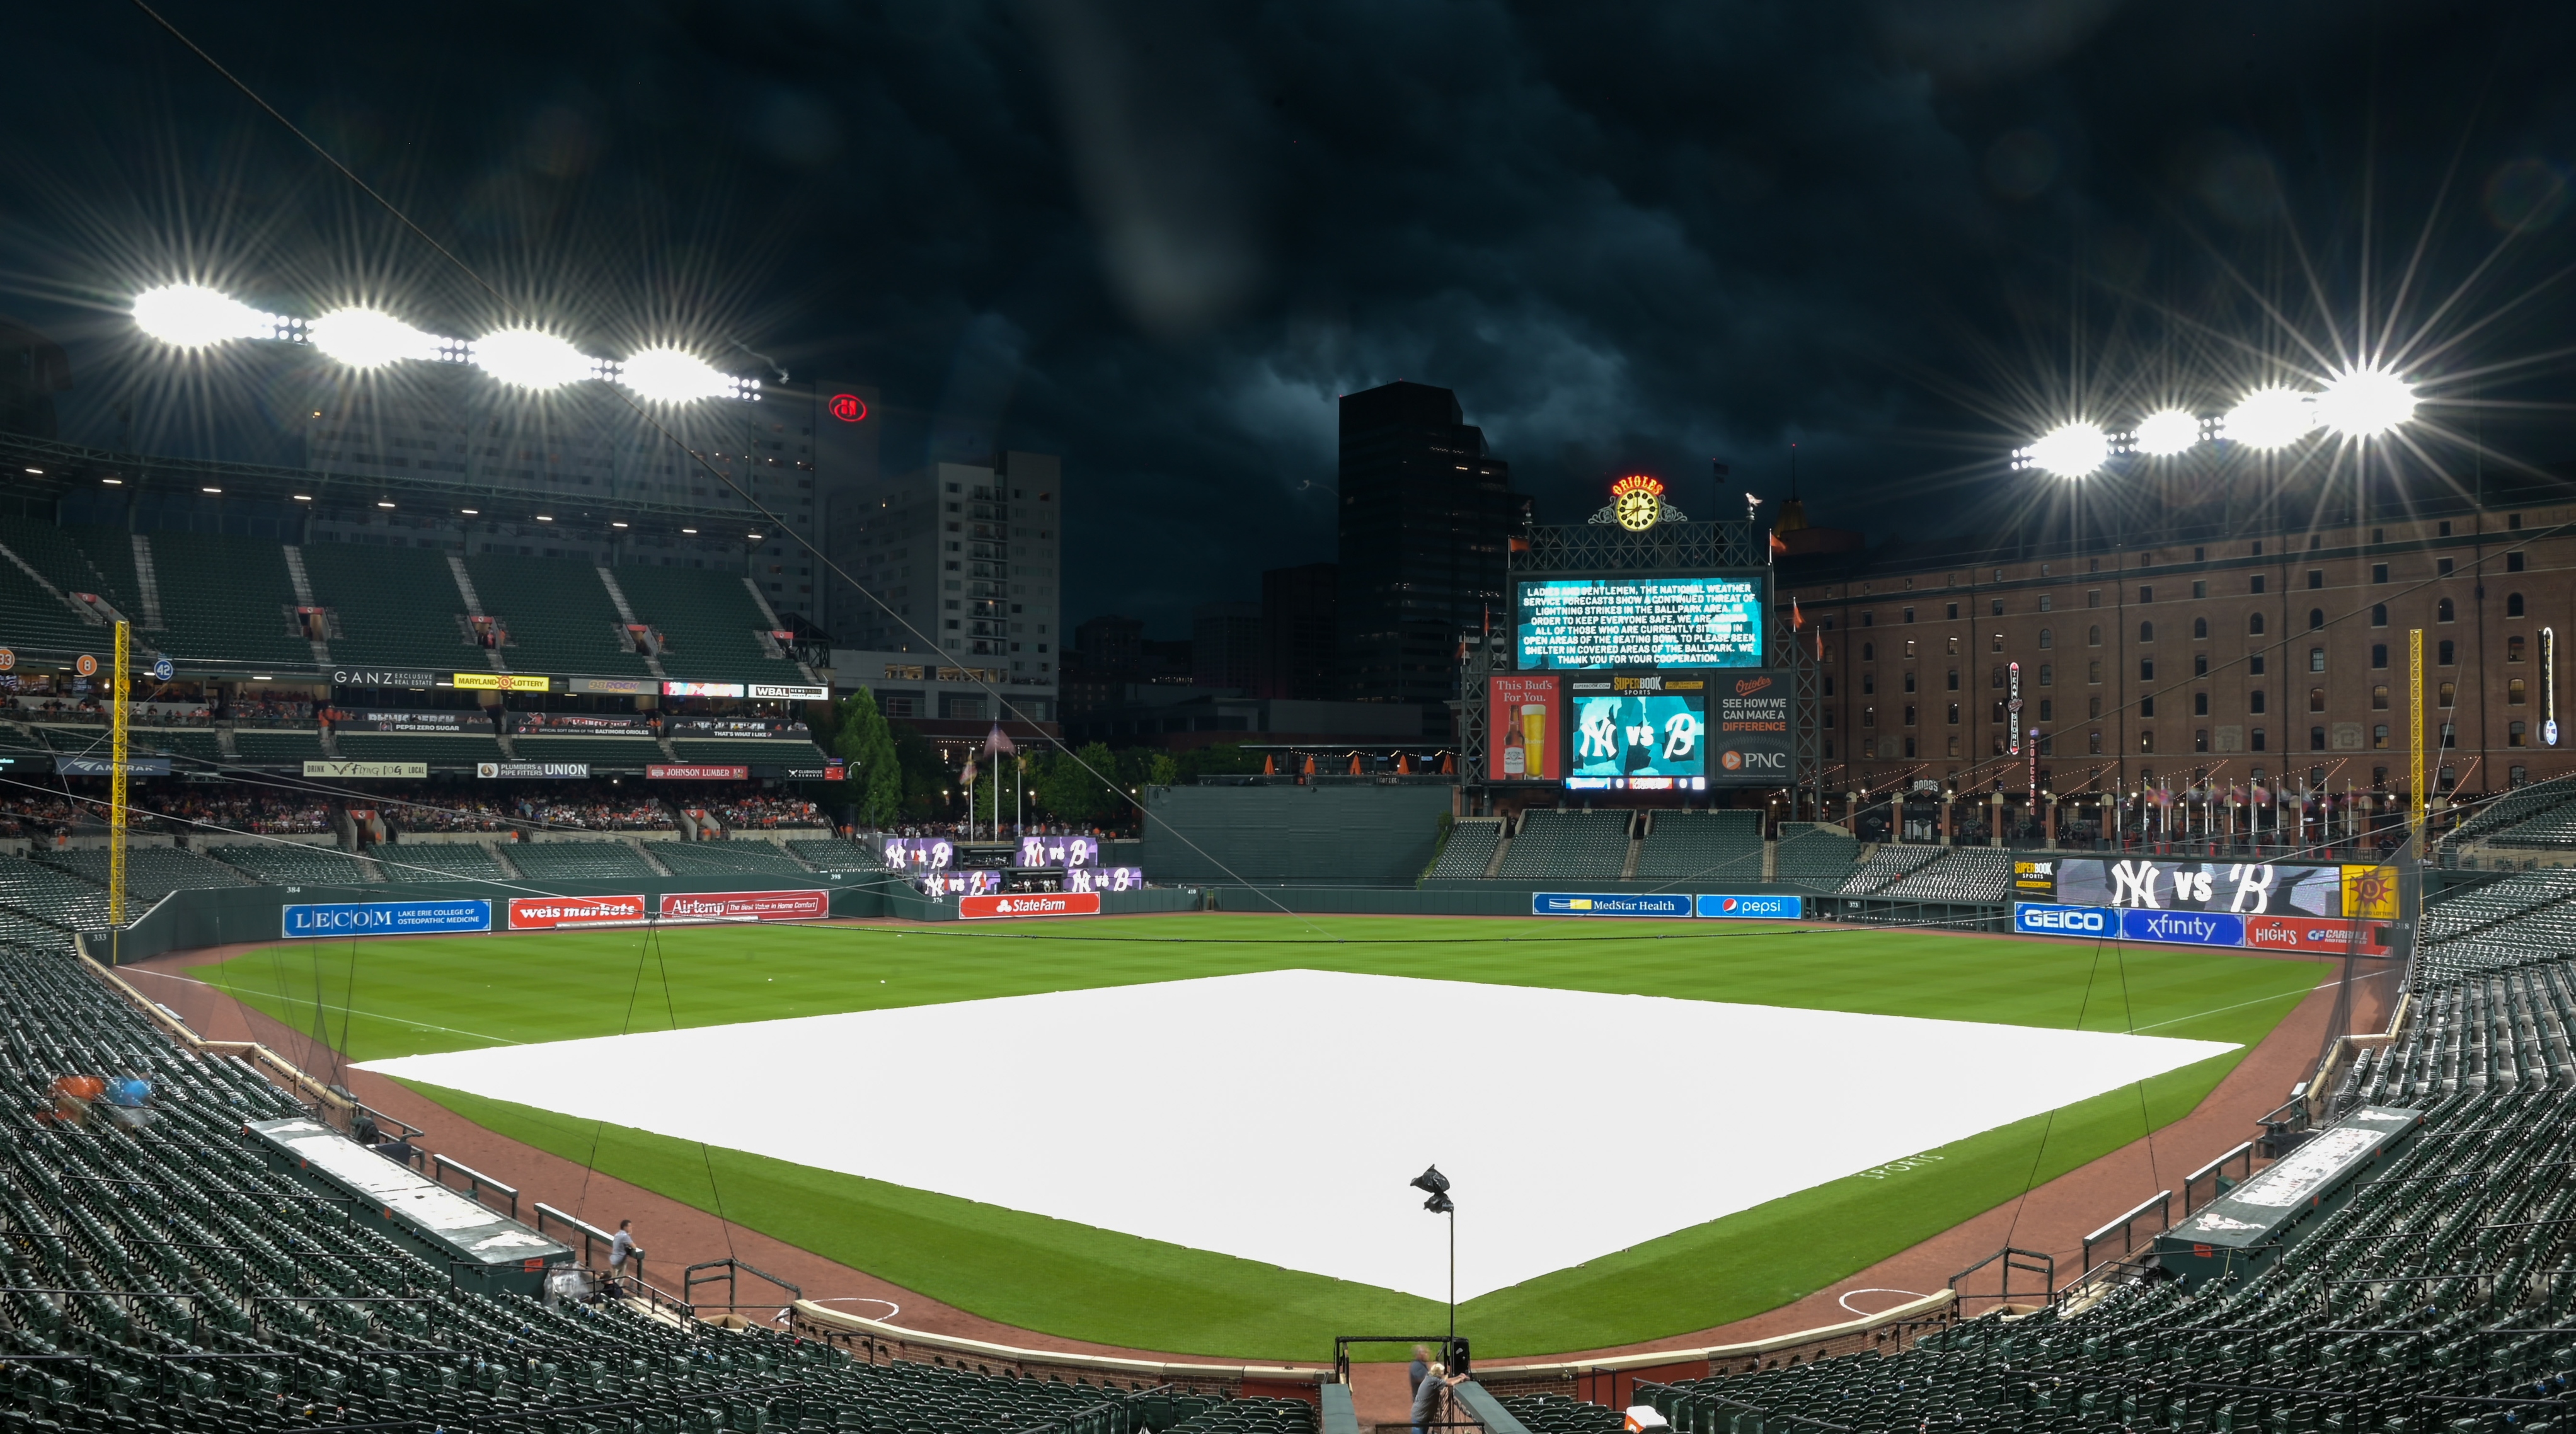 Maryland weather: Will it rain for the Orioles game?